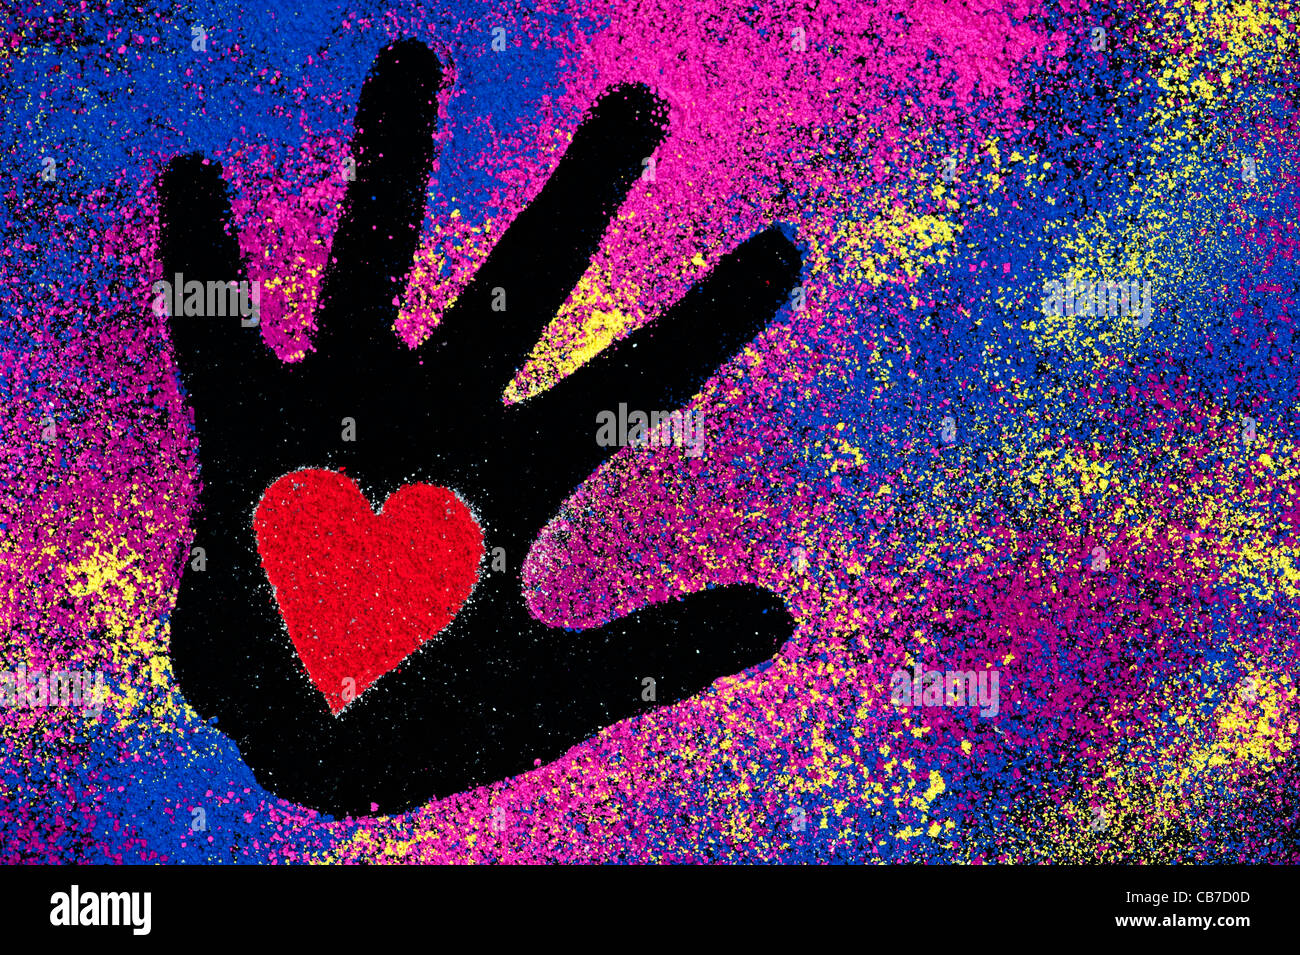 Childs hand prints with red heart shapes made with coloured powder on a black background Stock Photo